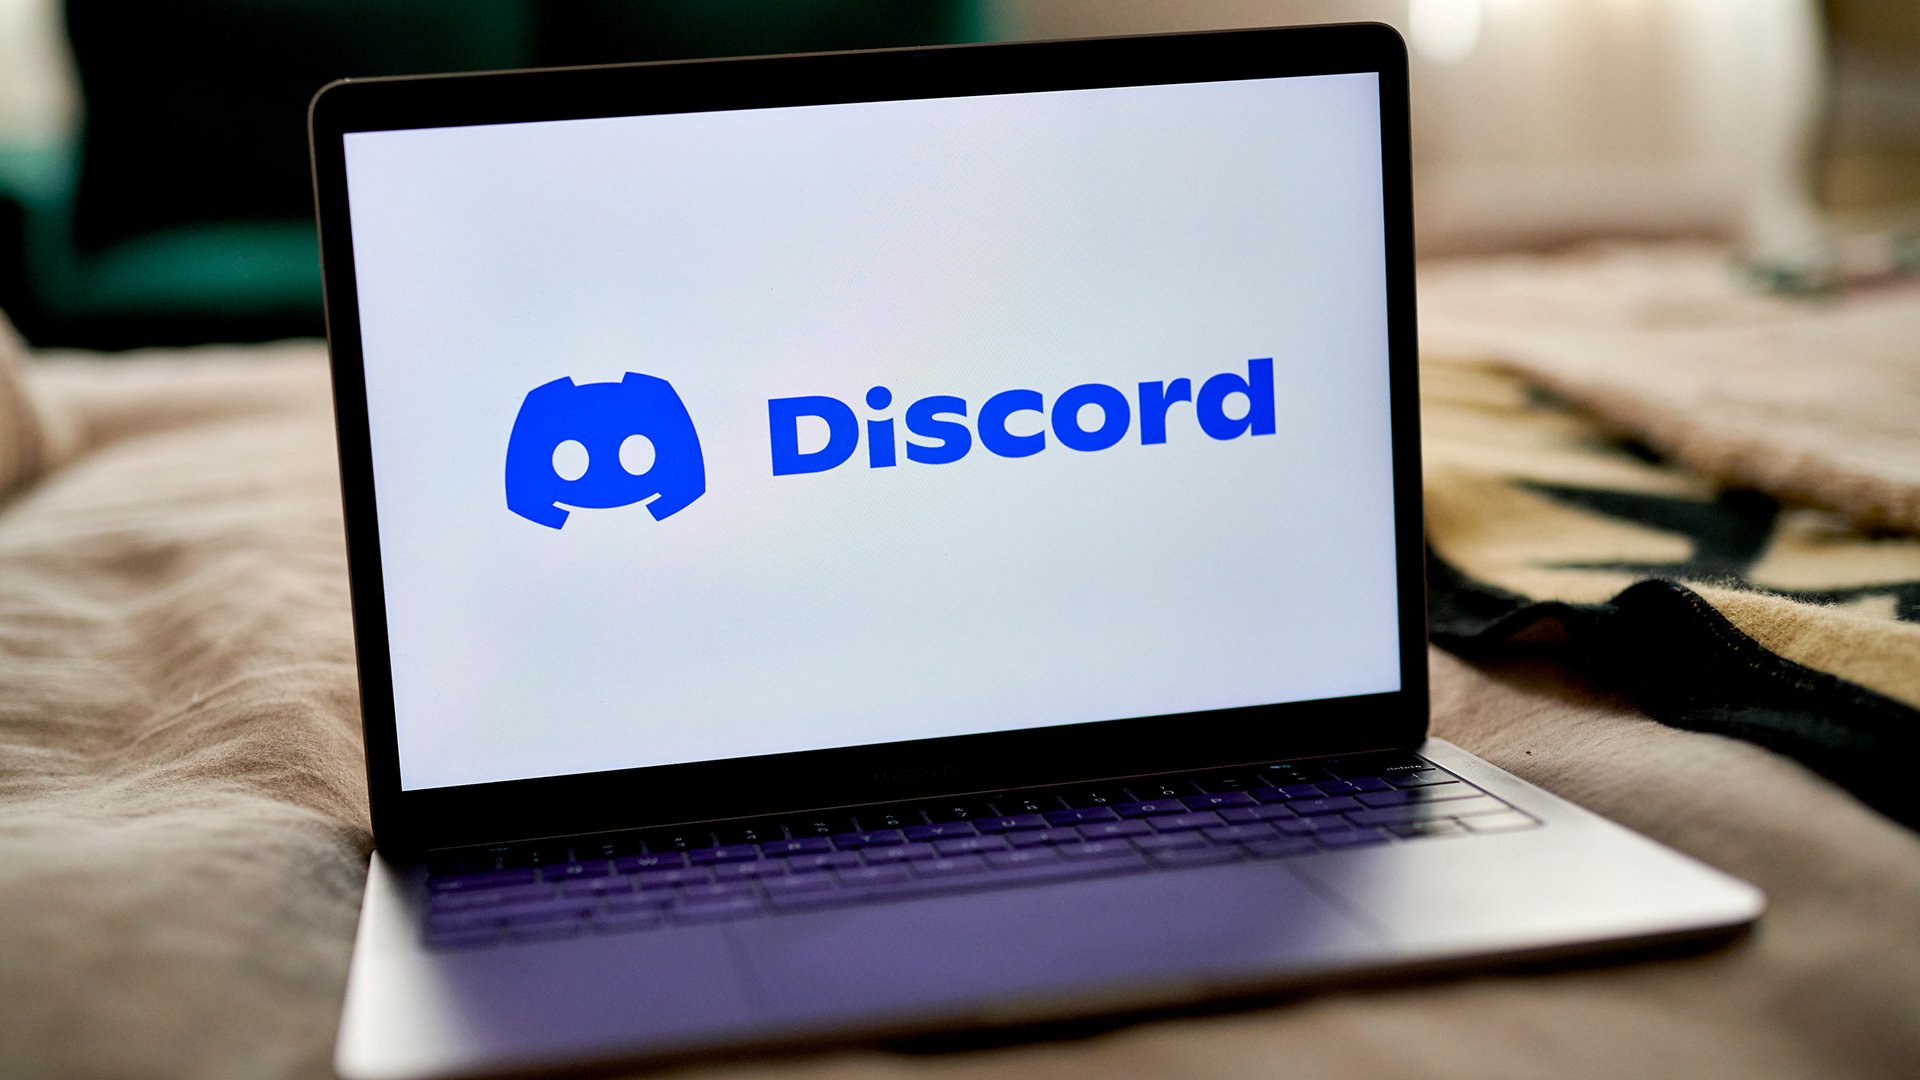 The Discord logo is visible on a laptop screen.